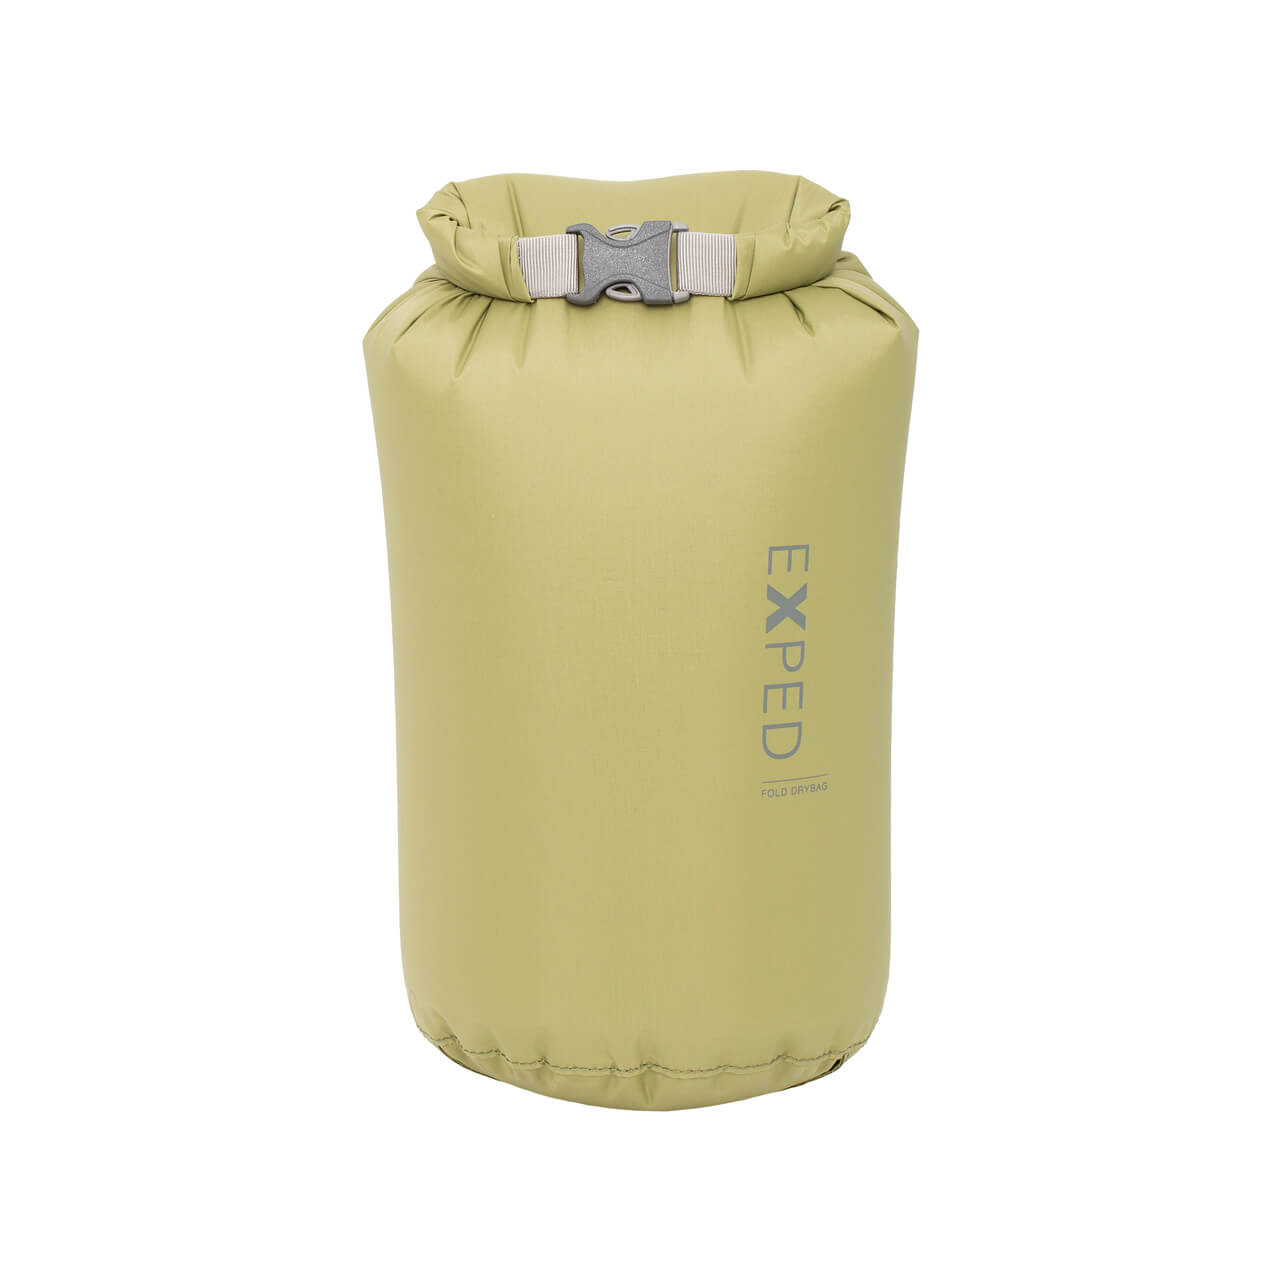 Exped Packsack Fold Drybag - Moos, XS von Exped}